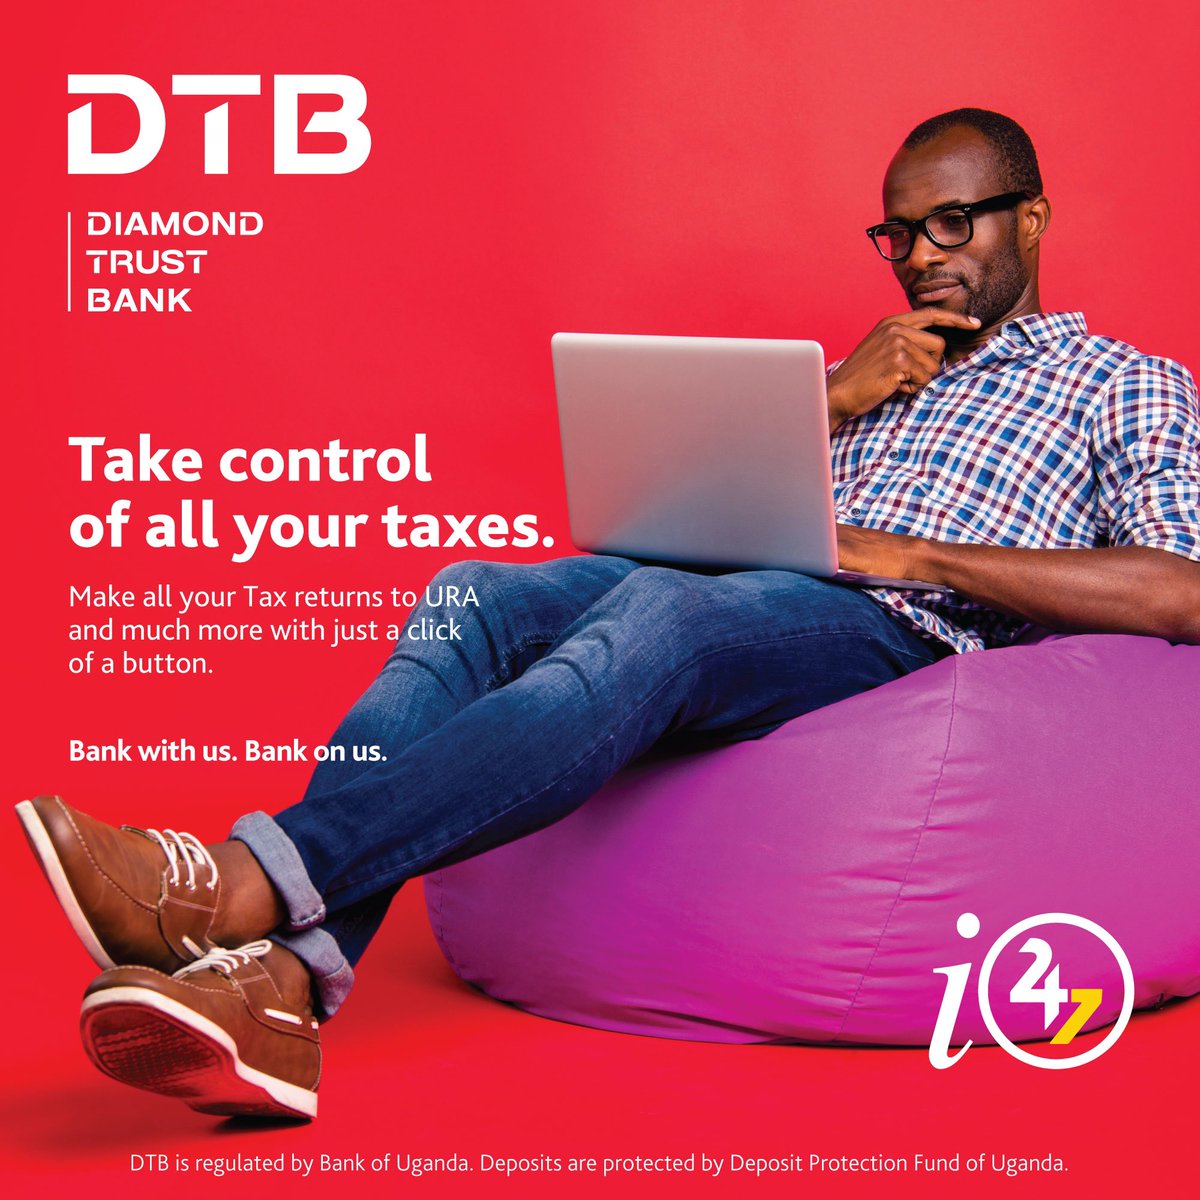 Did you know that you can pay your @URAuganda taxes using DTB i24/7 internet banking? Sign up today and enjoy convenient banking any day and time for personal and business needs. Call toll free 0800 242 242 for support. #BankWithUsBankOnUs